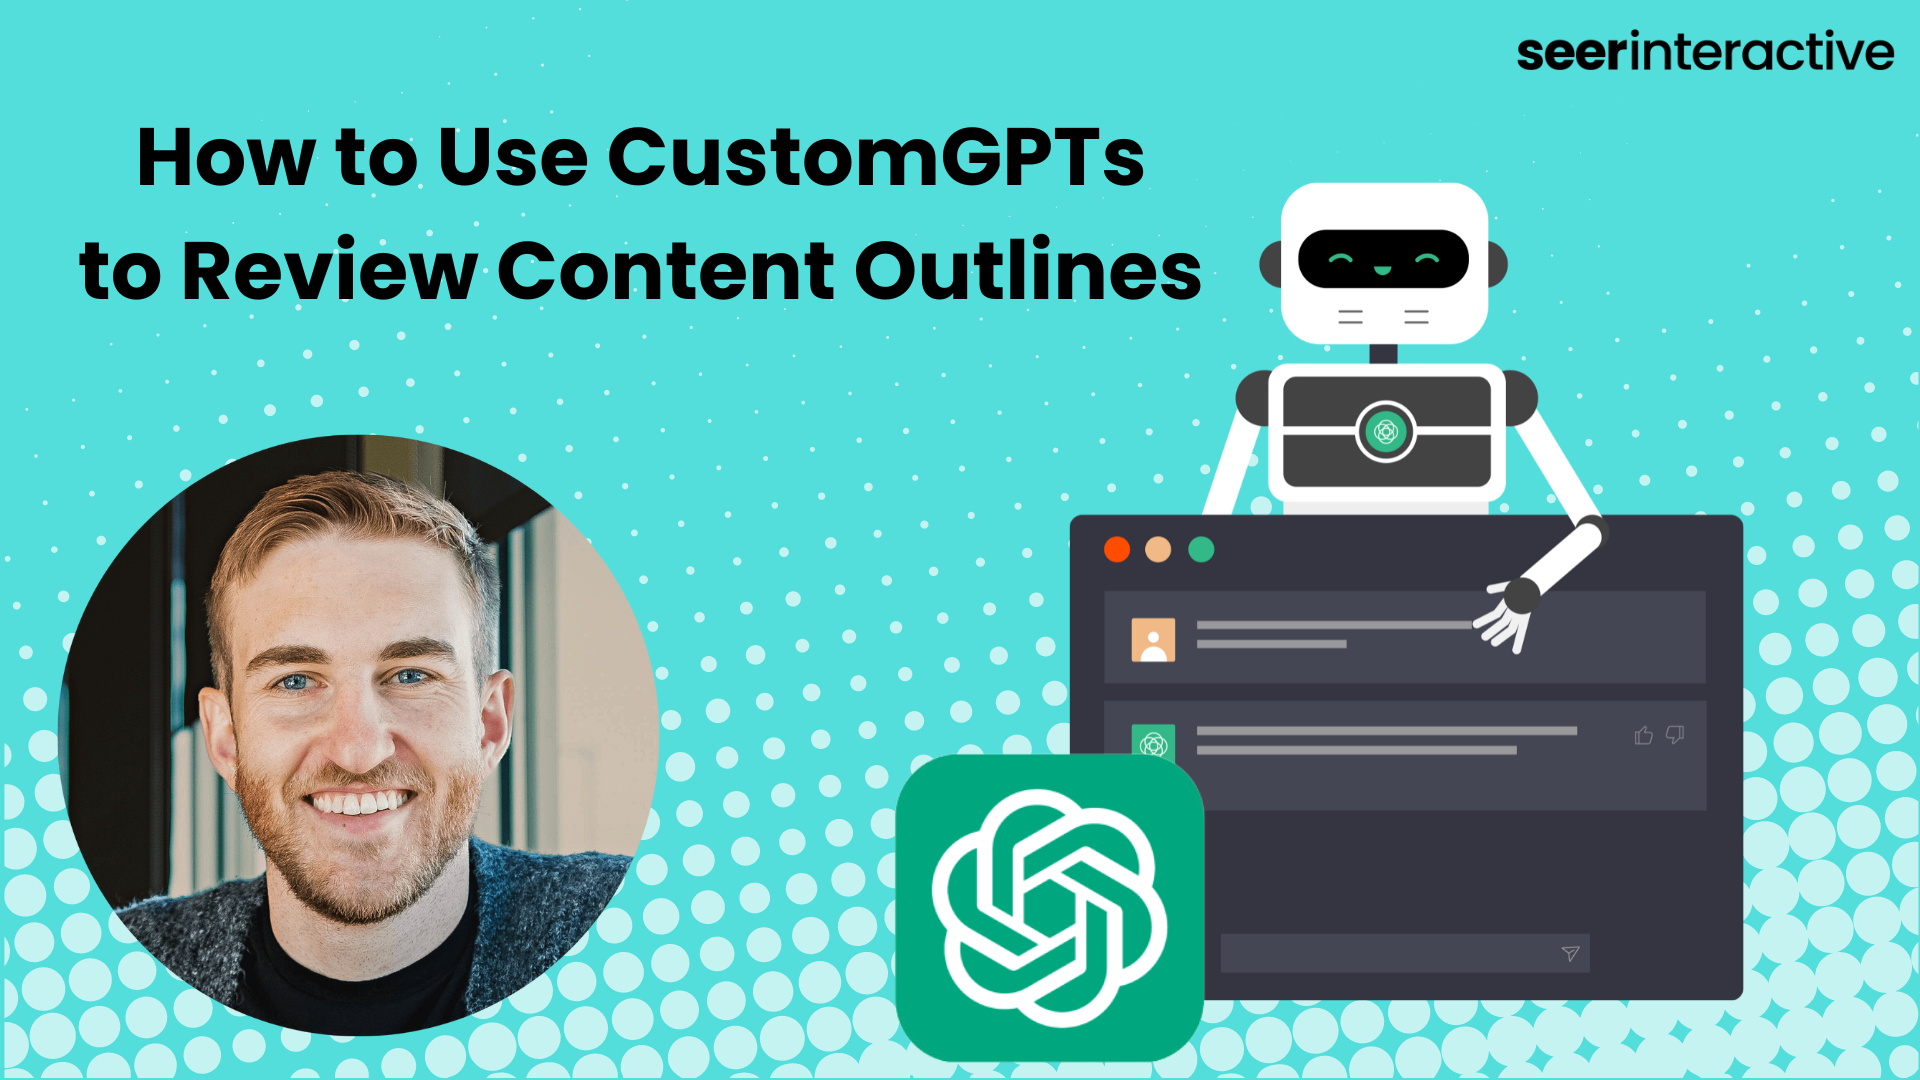 Using CustomGPTs for Content Outline & Snippet Review